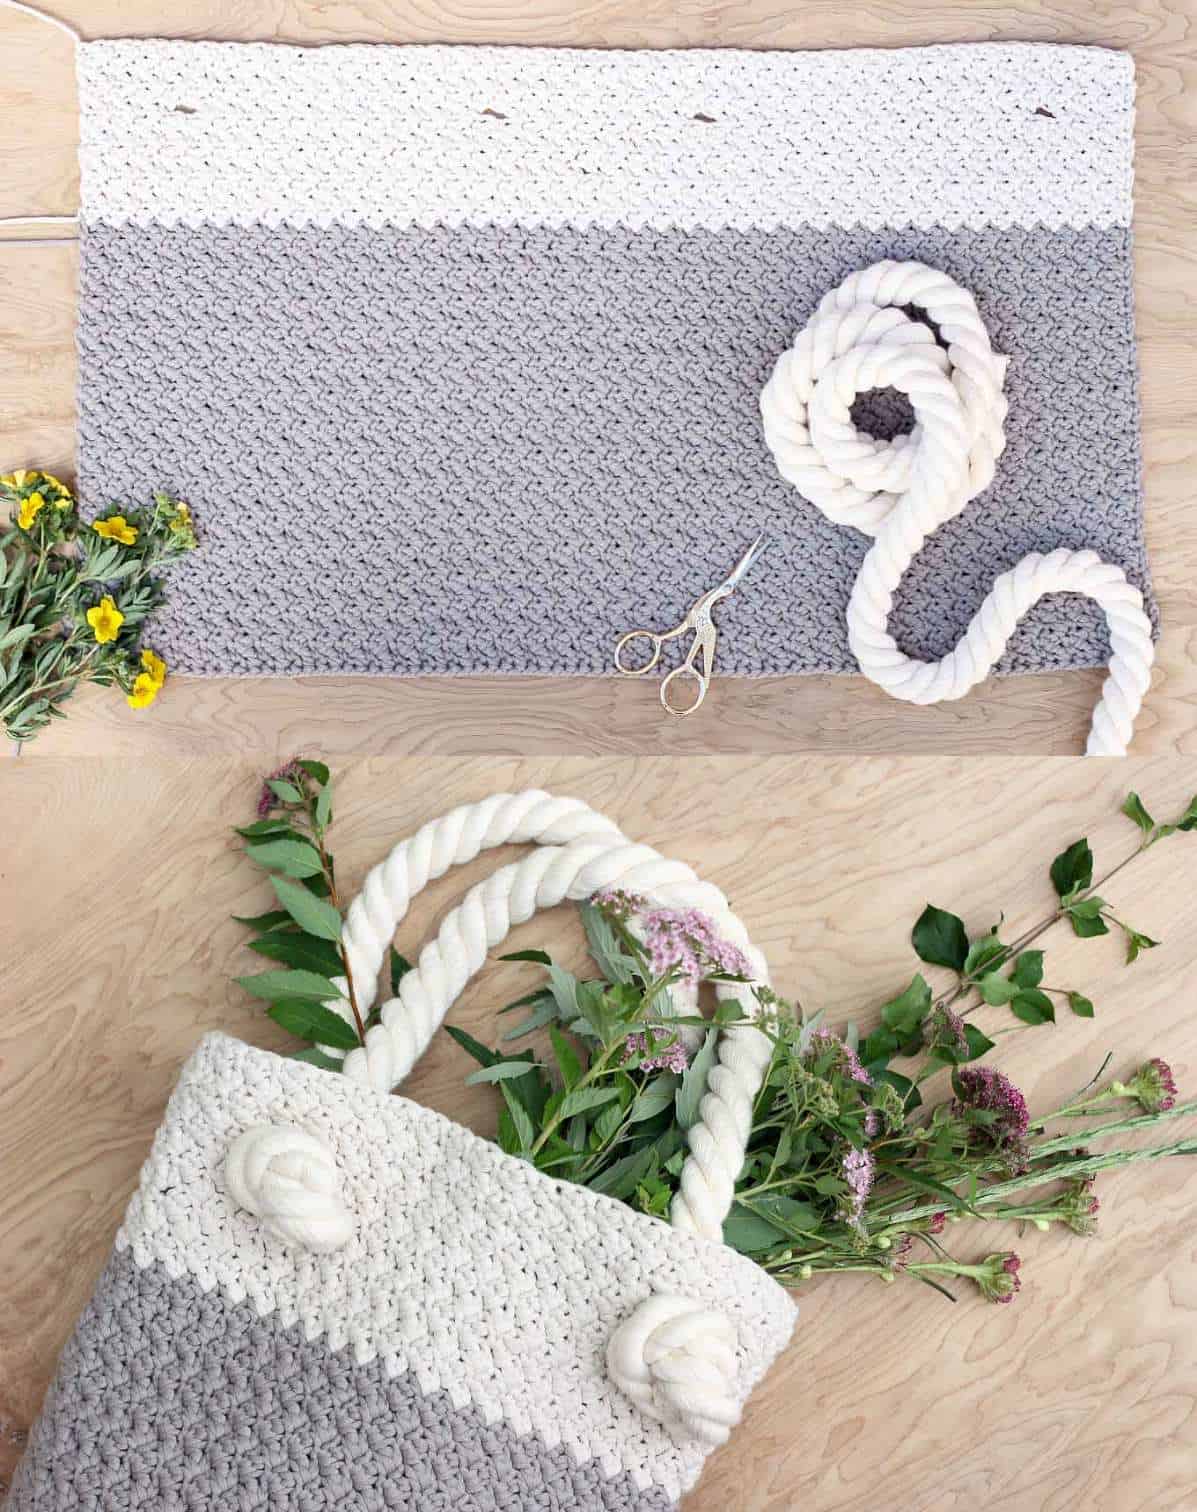 A crocheted rectangle being made into a simple tote bag.